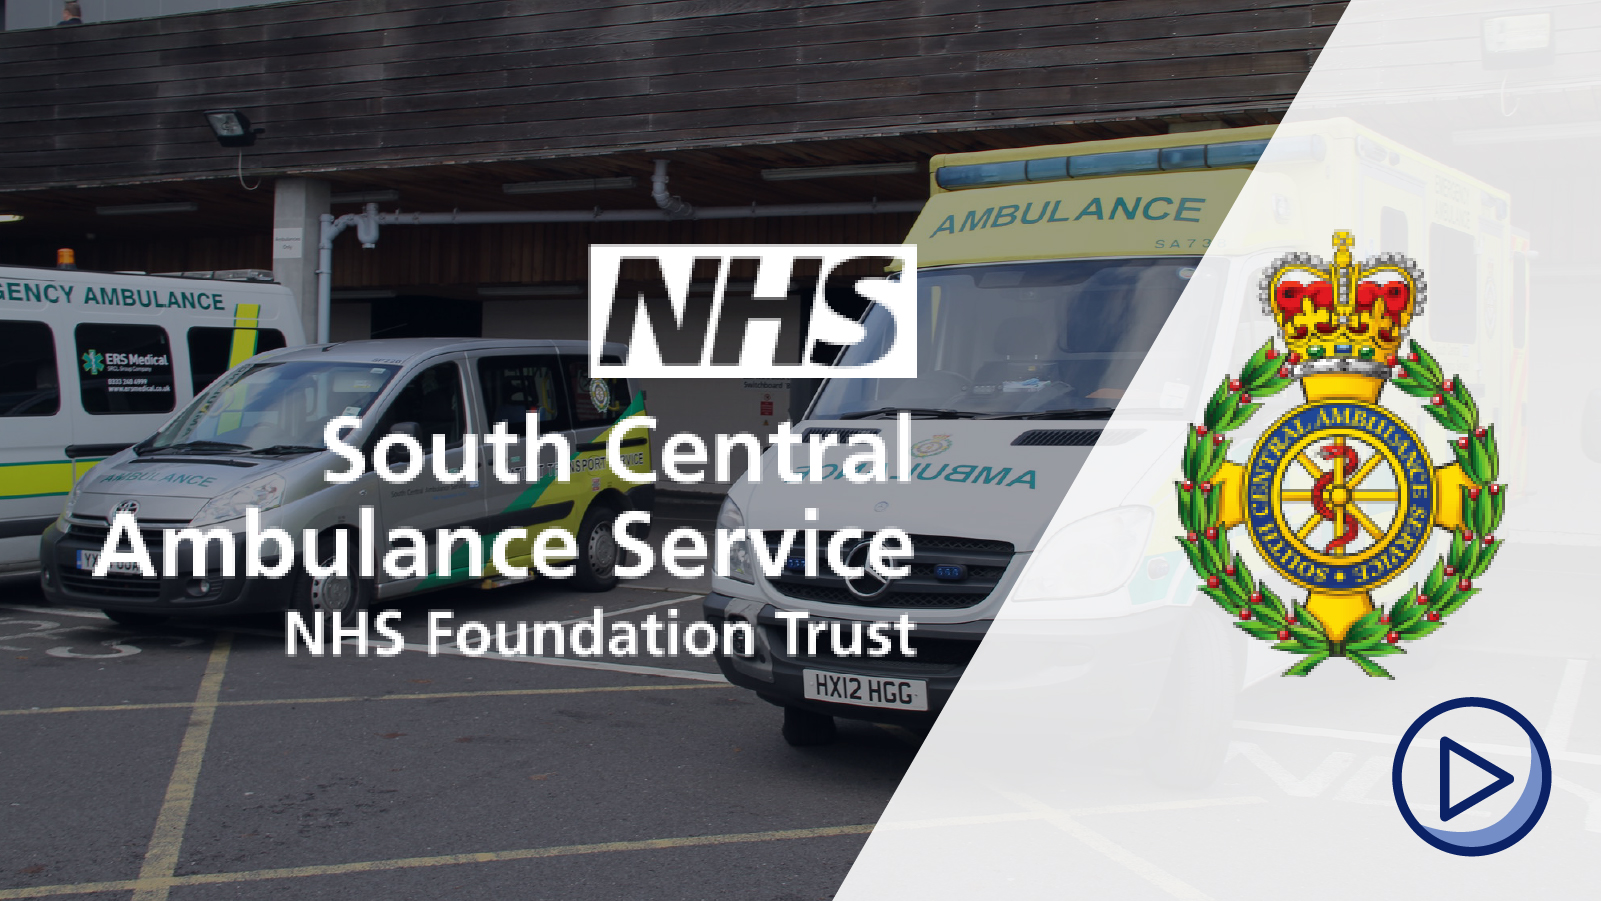 NHS South Central Ambulance Service NHS Foundation Trust